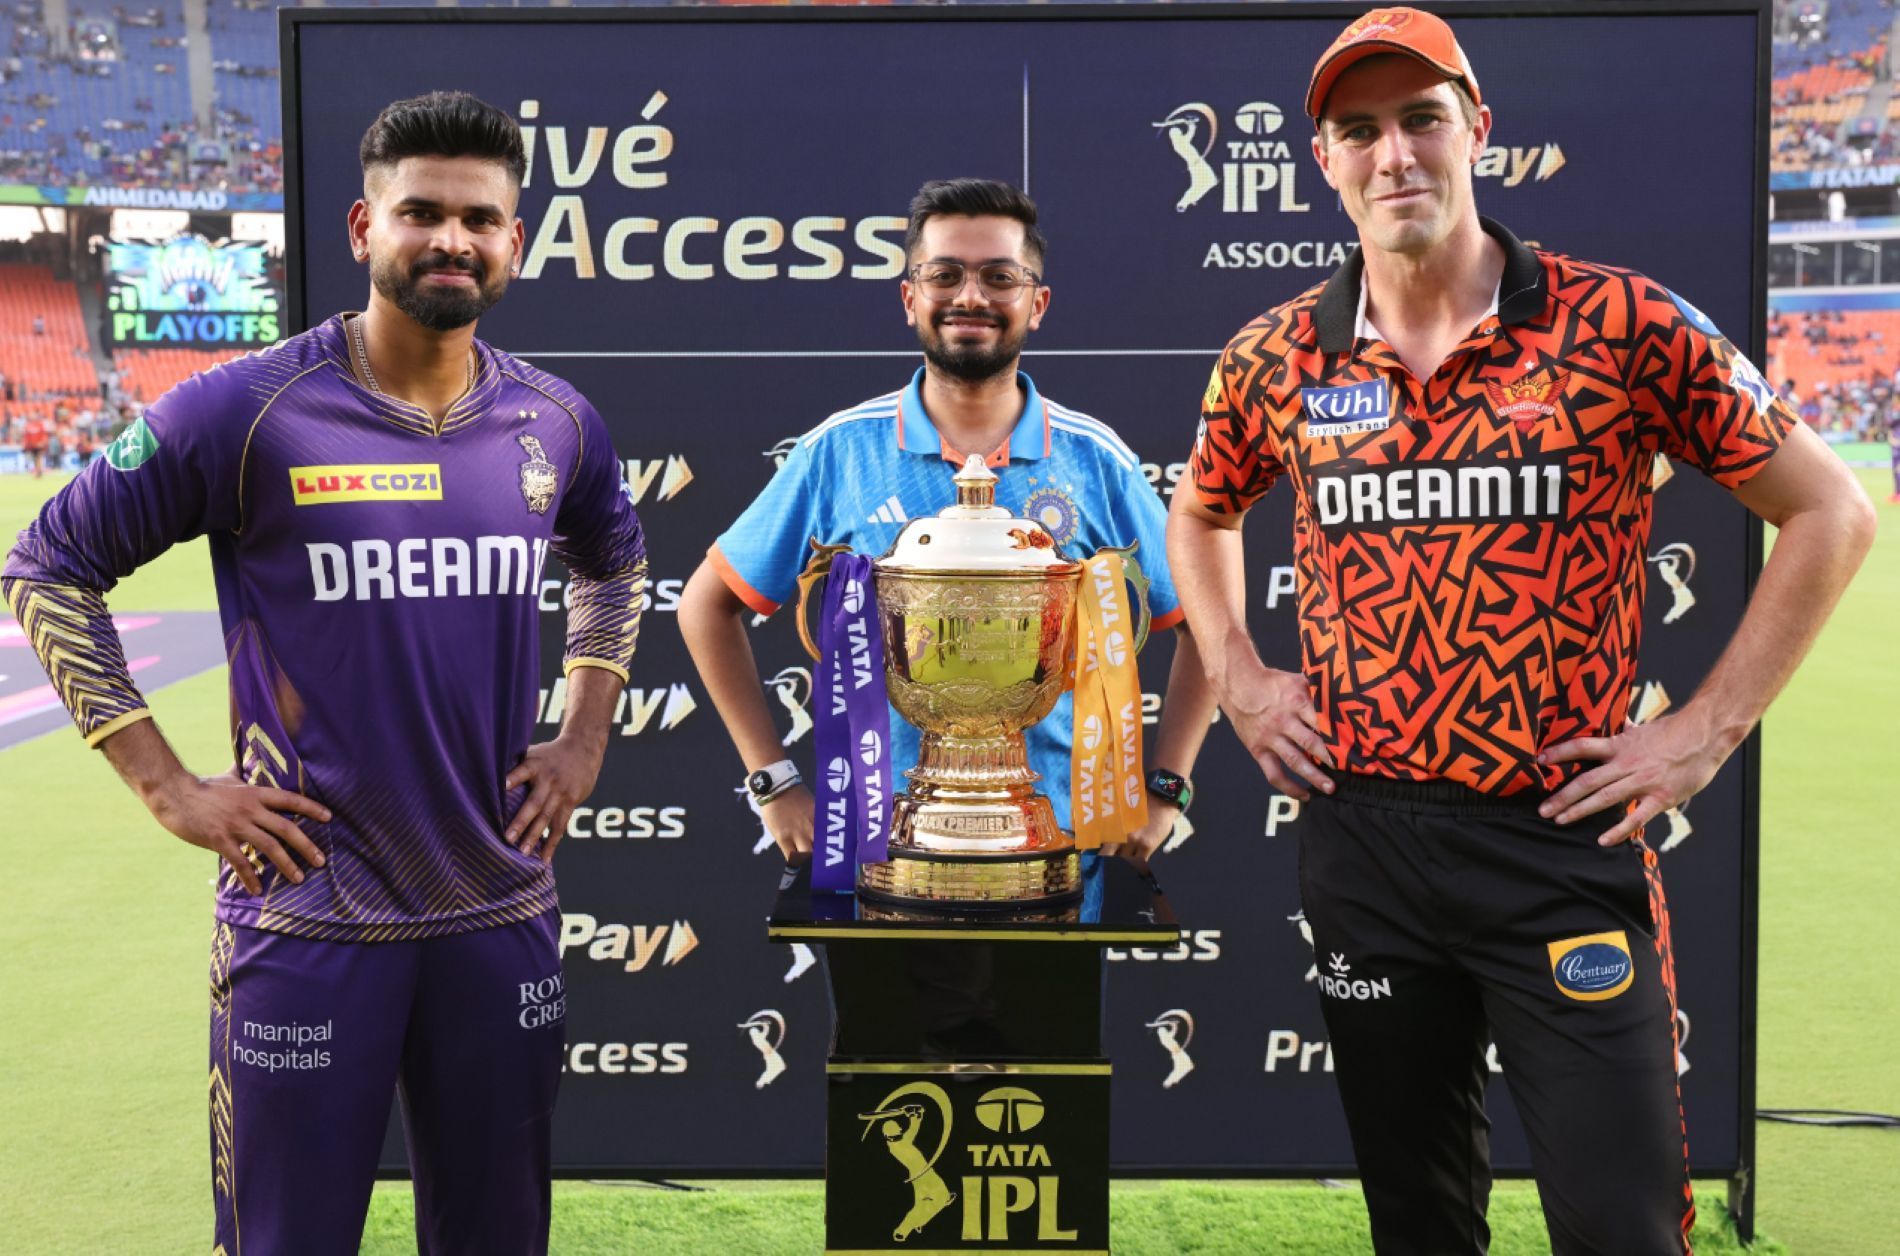 The two captains pose with the IPL Trophy [Credit: IPL Twitter handle]